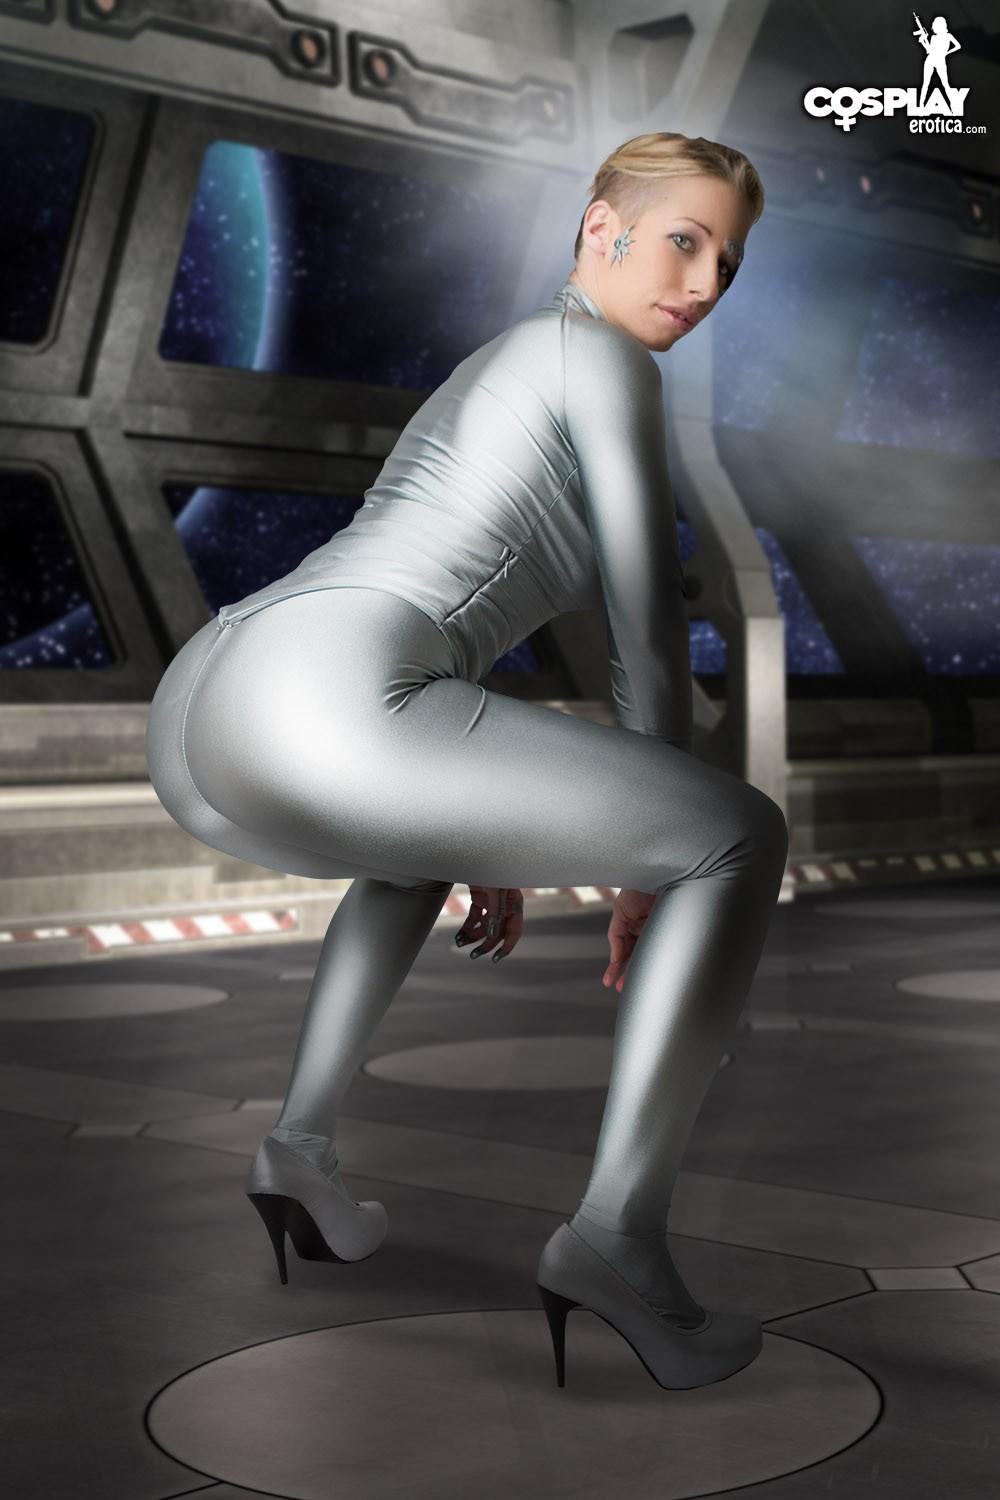 Hot cosplay girl Sandy Bell is your fantasy Seven of Nine for the night #59902287